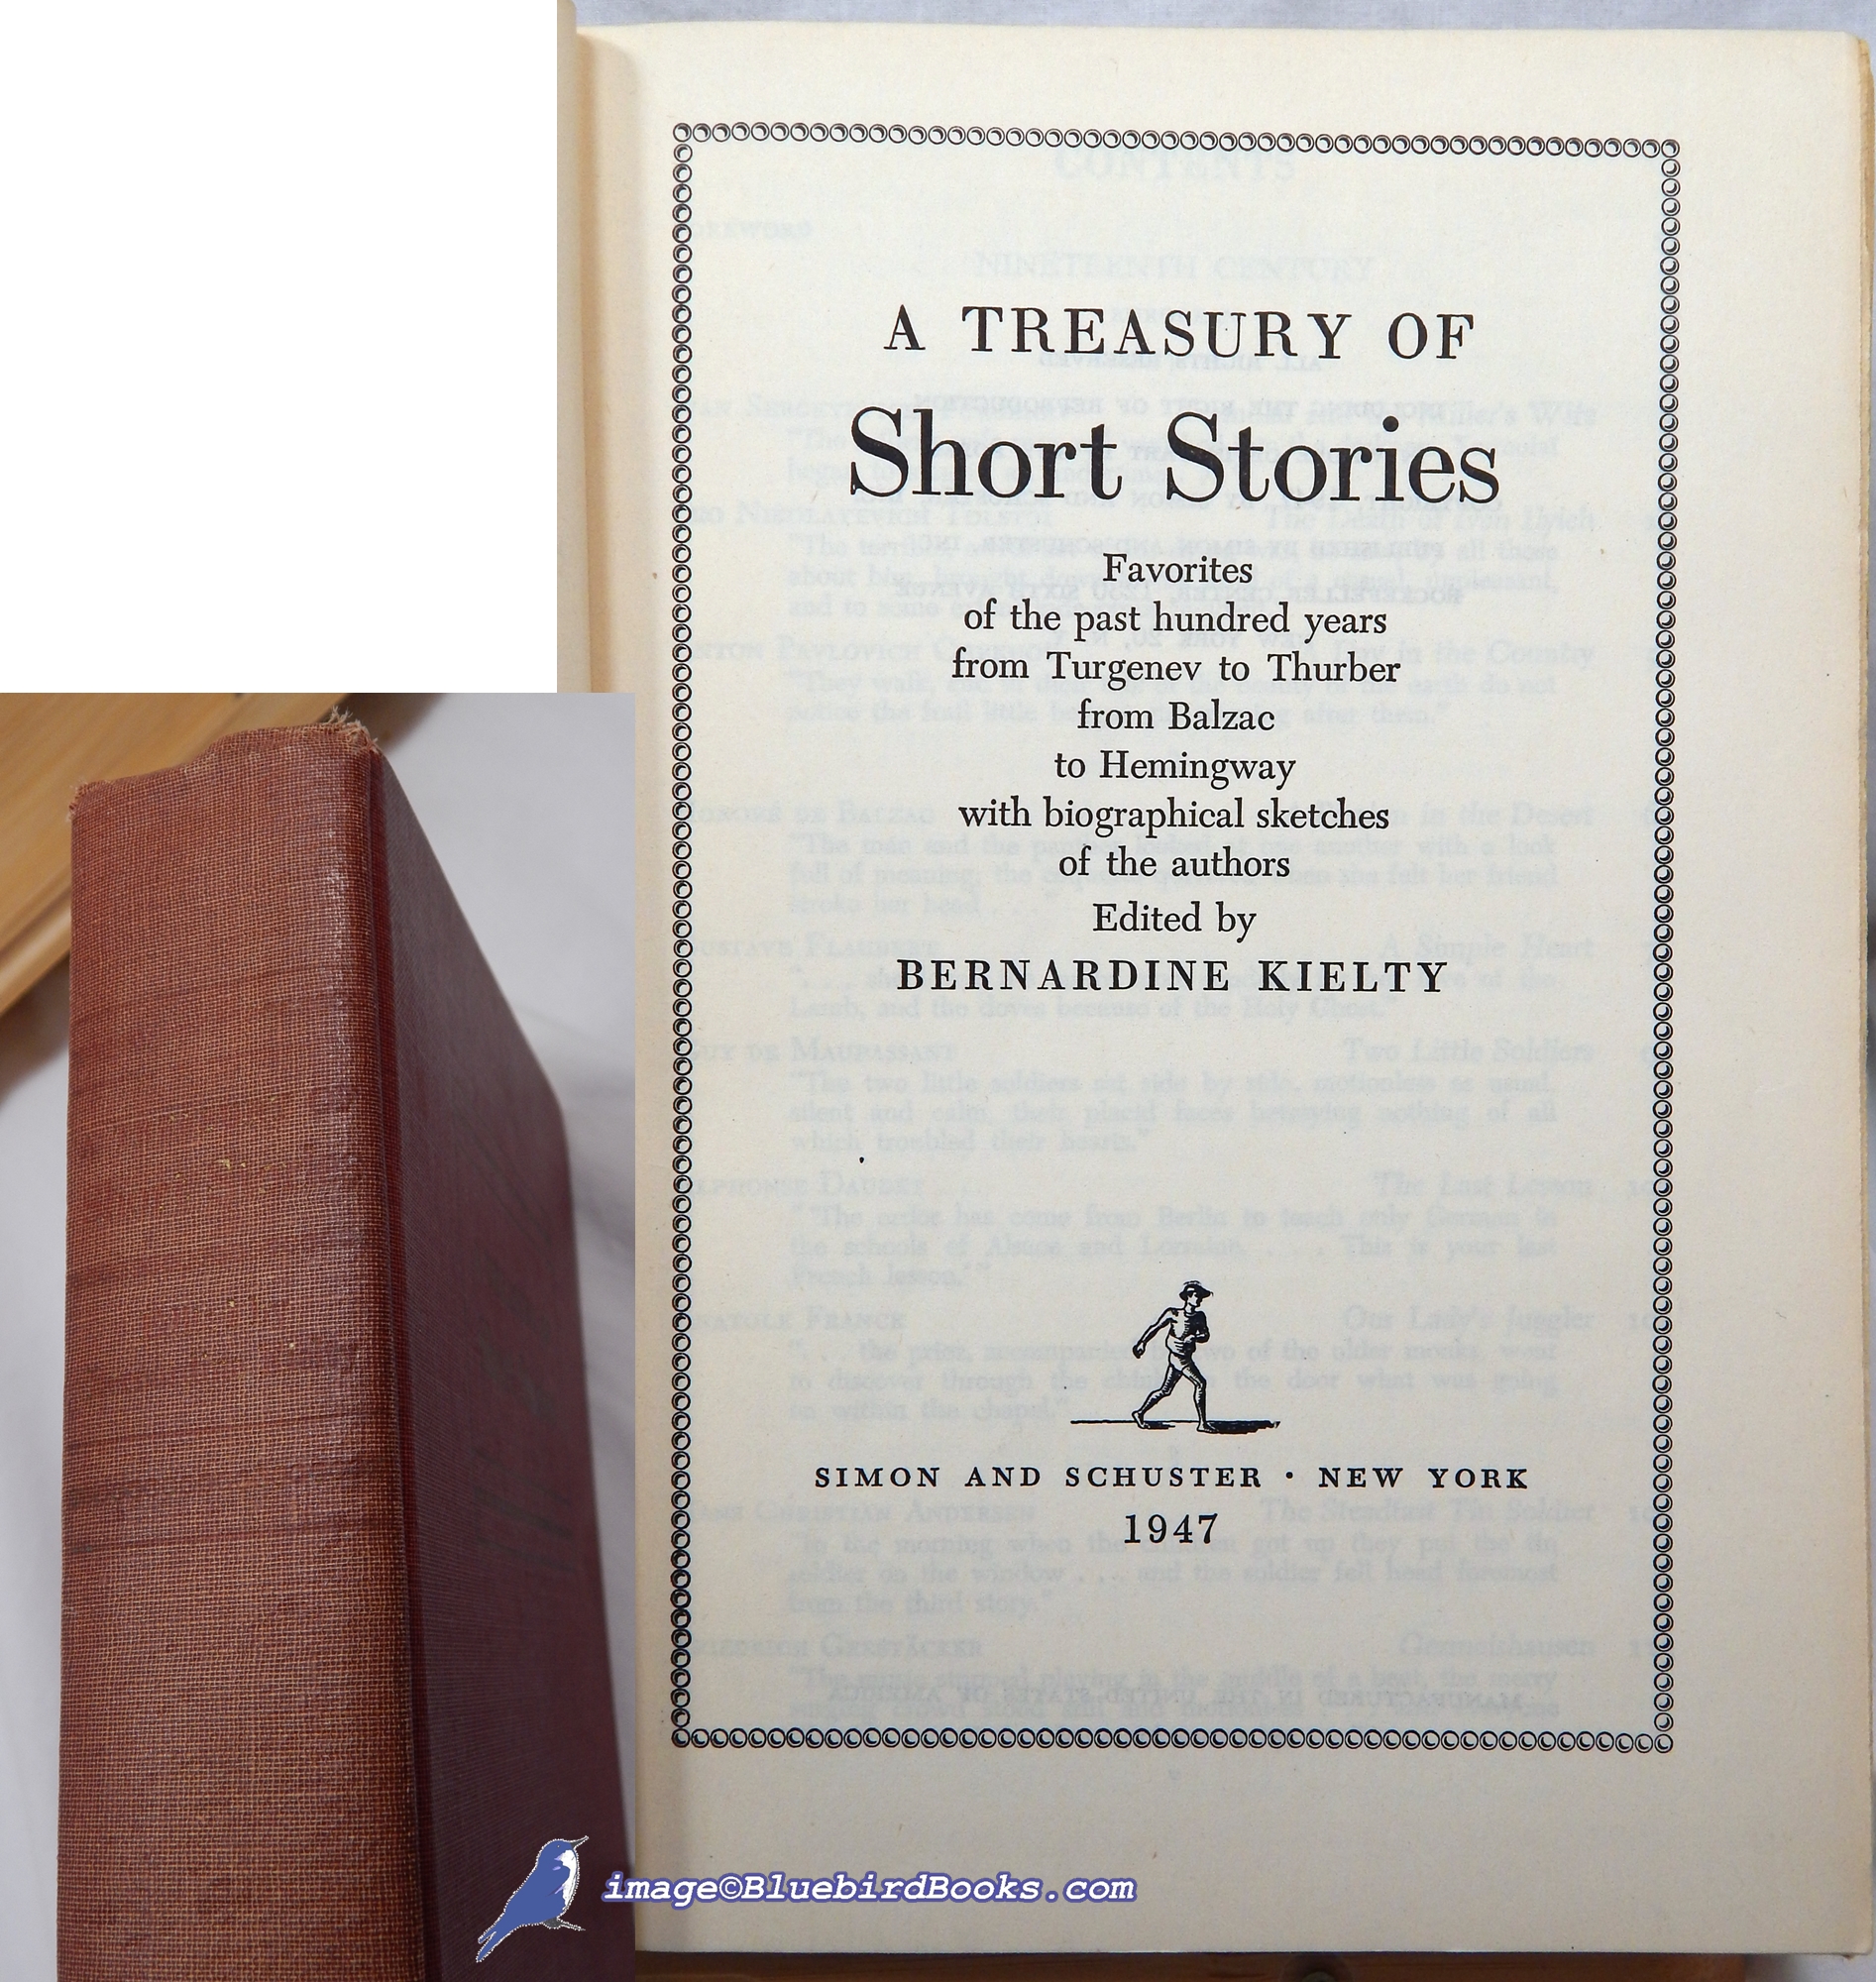 KIELTY, BERNARDINE (EDITOR) - A Treasury of Short Stories: Containing Favorites from the Past Hundred Years from Turgenev to Thurber, from Balzac to Hemingway, with Biographical Sketches of the Authors